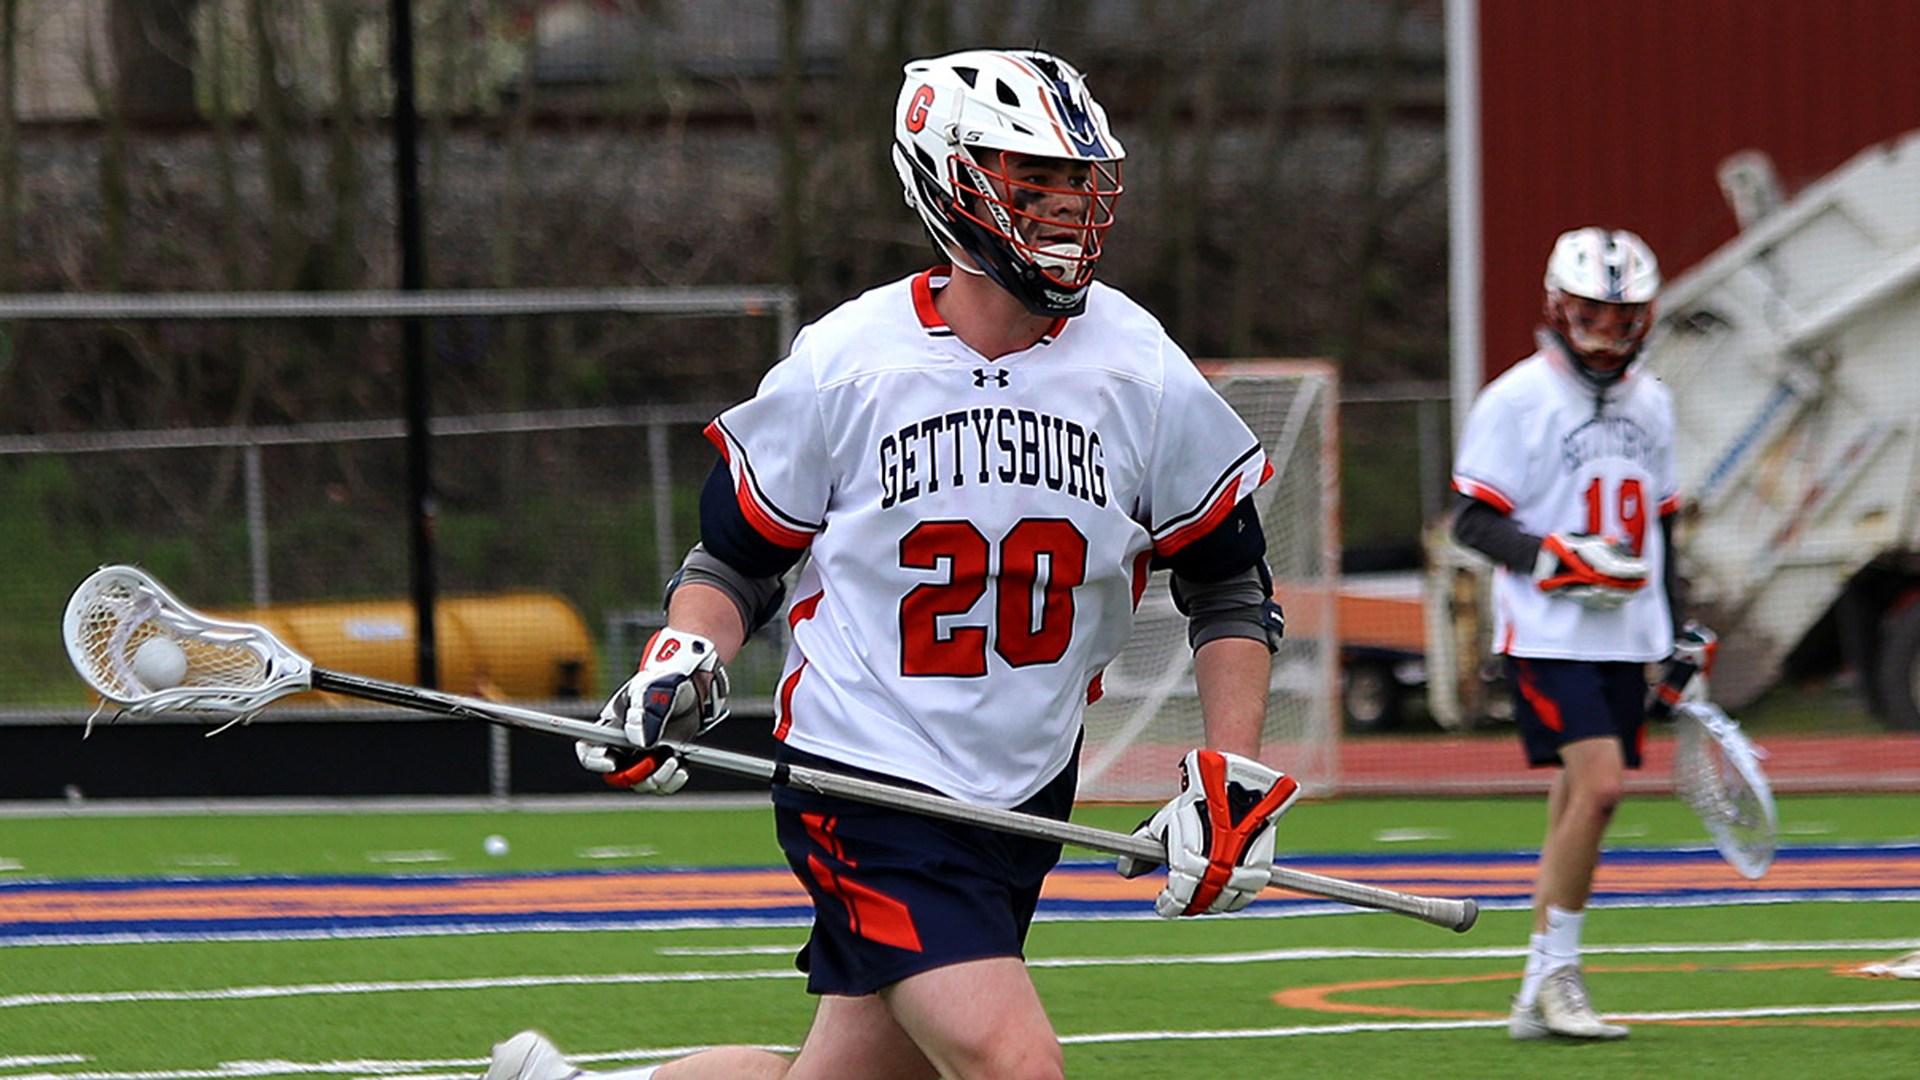 Andrew Horn, Gettysburg, Defensive Player of the Year